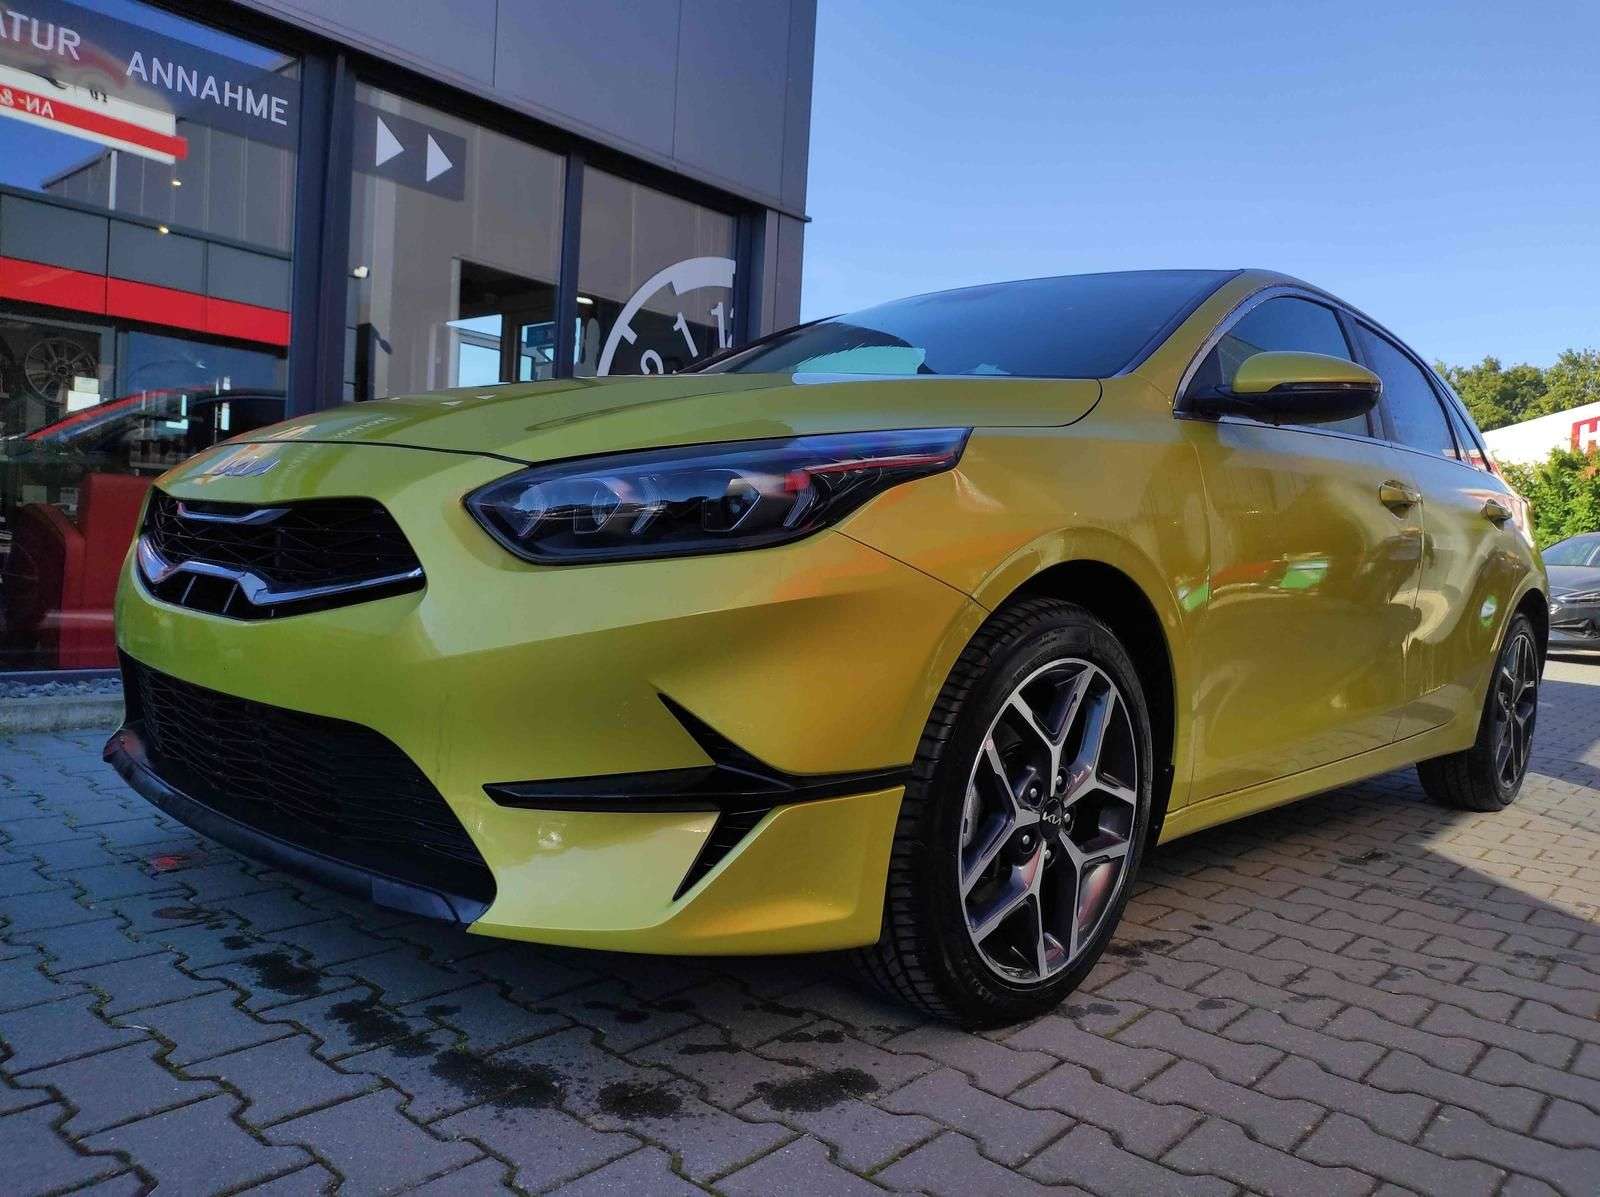 Kia Ceed / cee'd Sedan in Yellow pre-registered in Polch for € 23,390.-